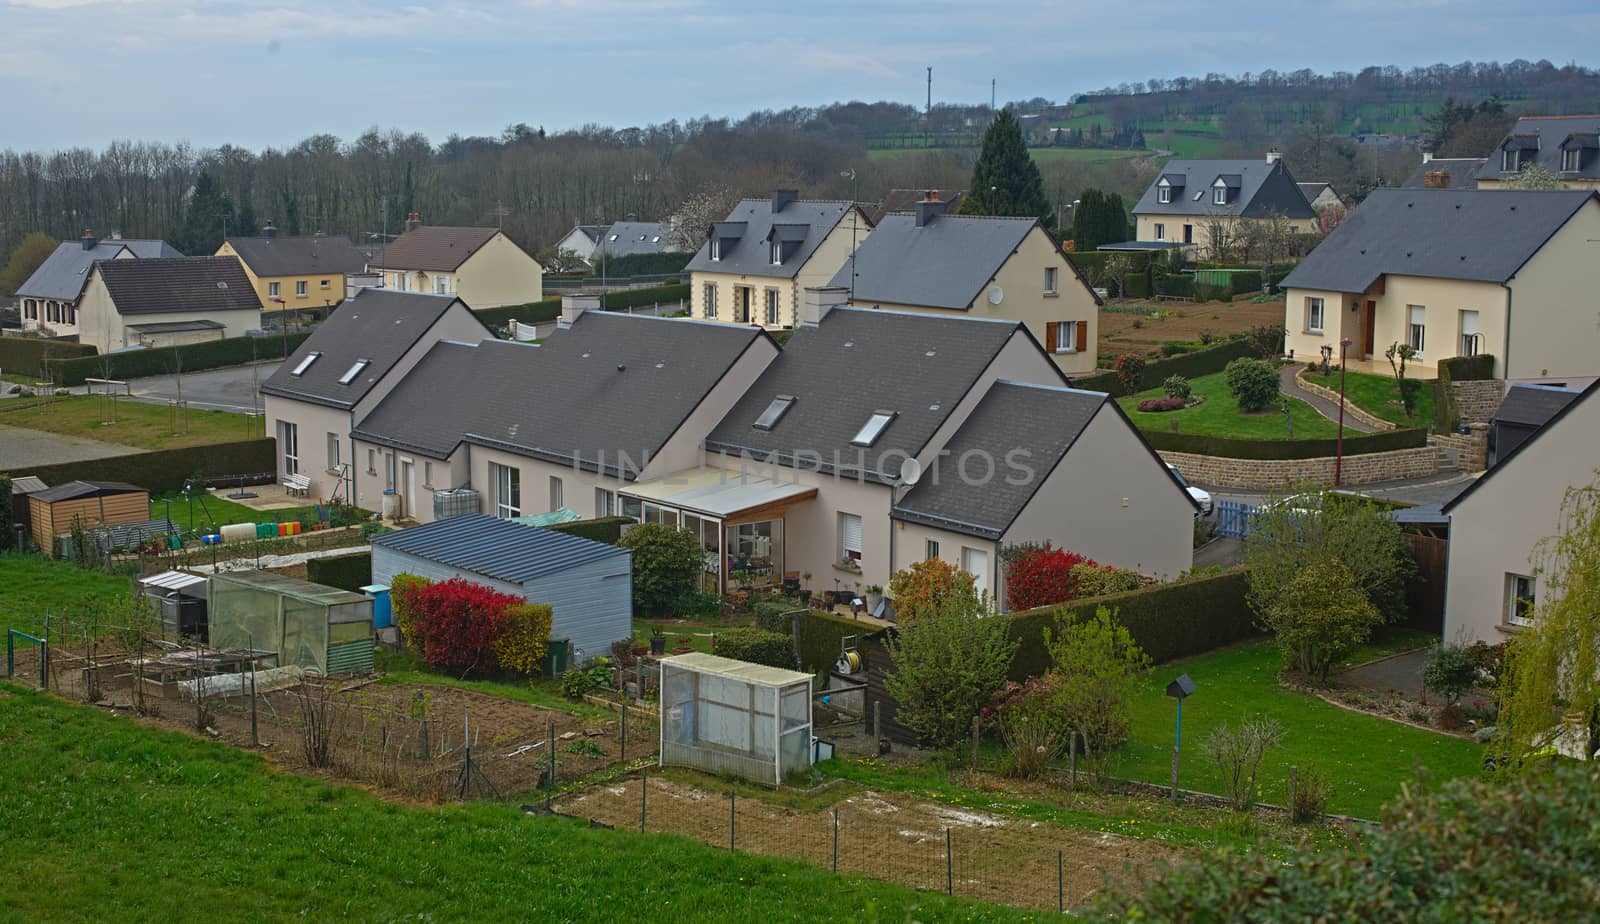 SOURDEVAL, FRANCE - April 6th 2019 - Houses in the village by sheriffkule